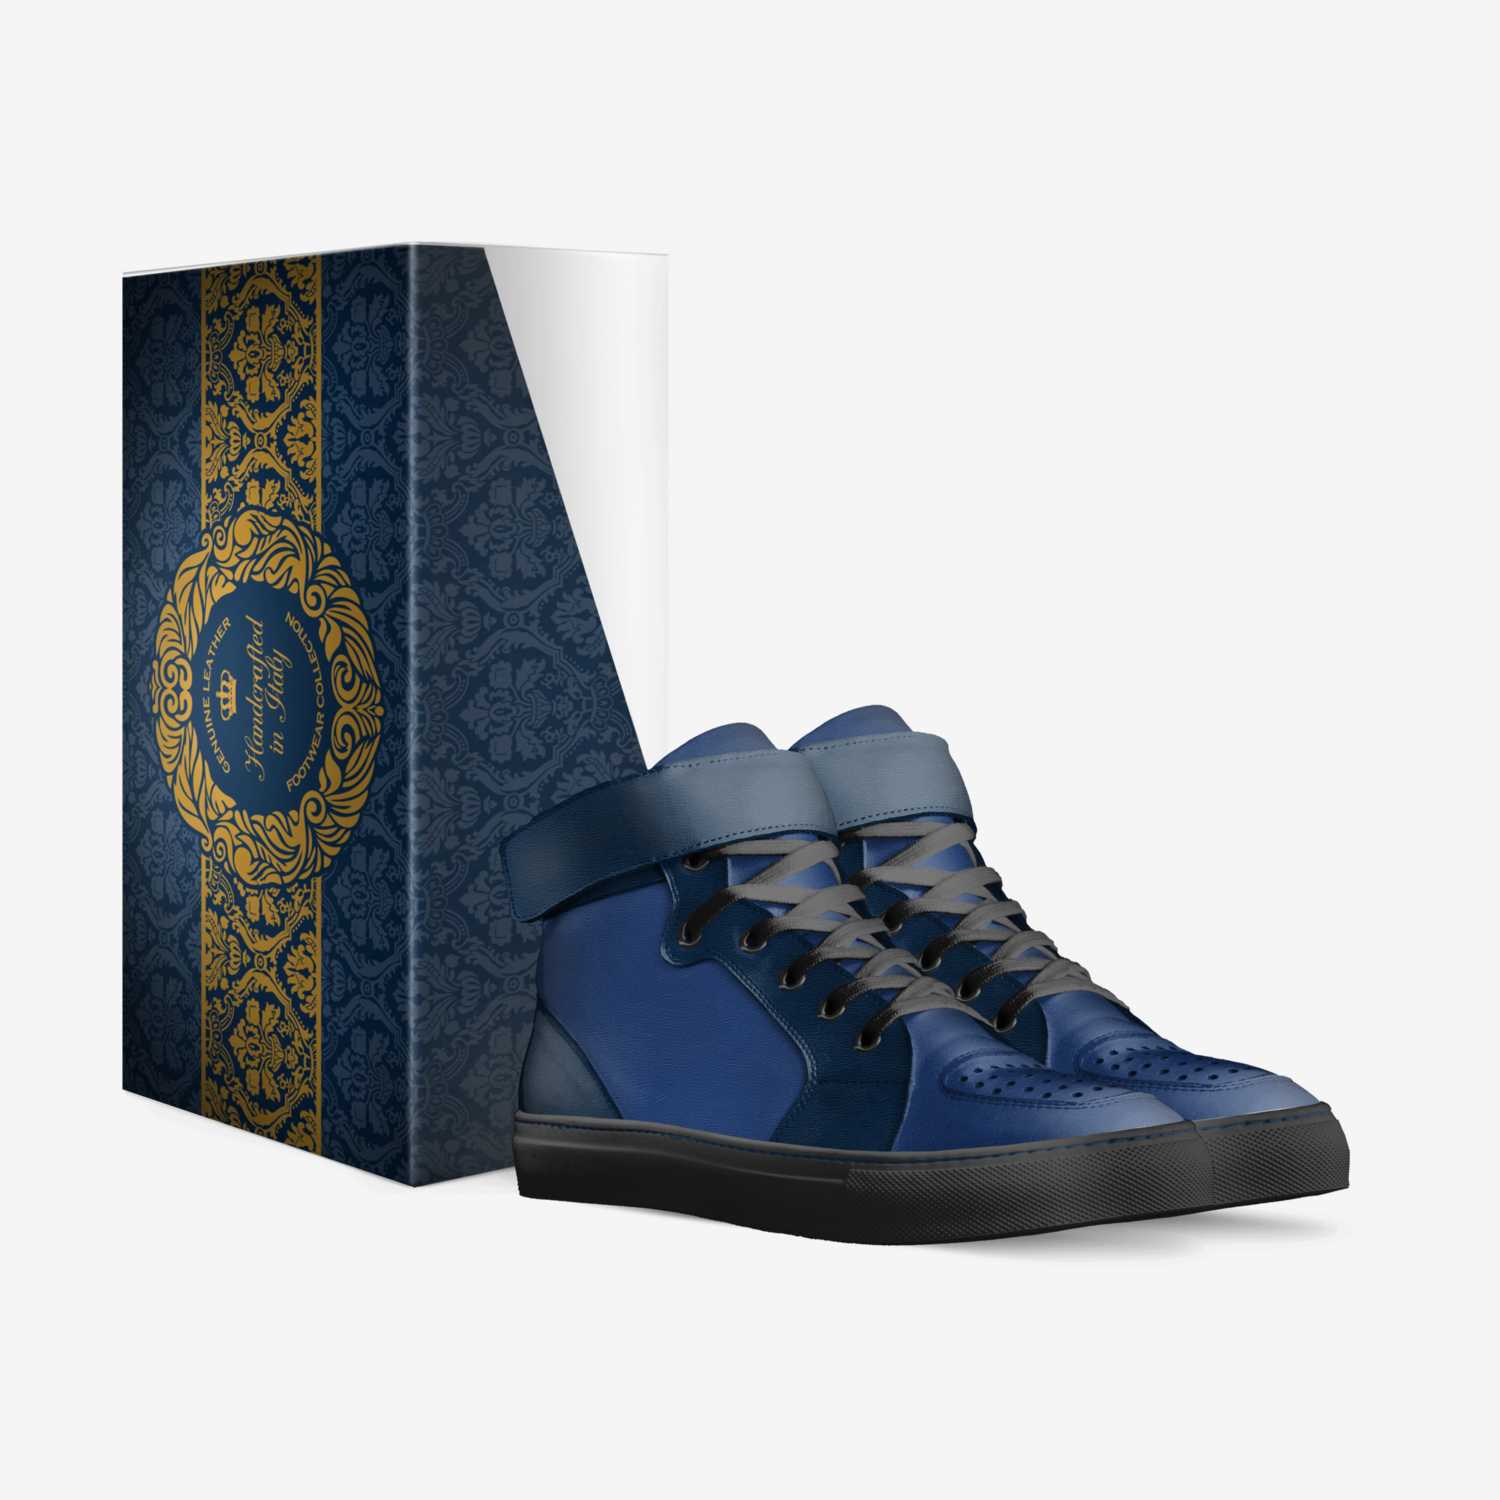 T.U.G custom made in Italy shoes by David Sheppard | Box view